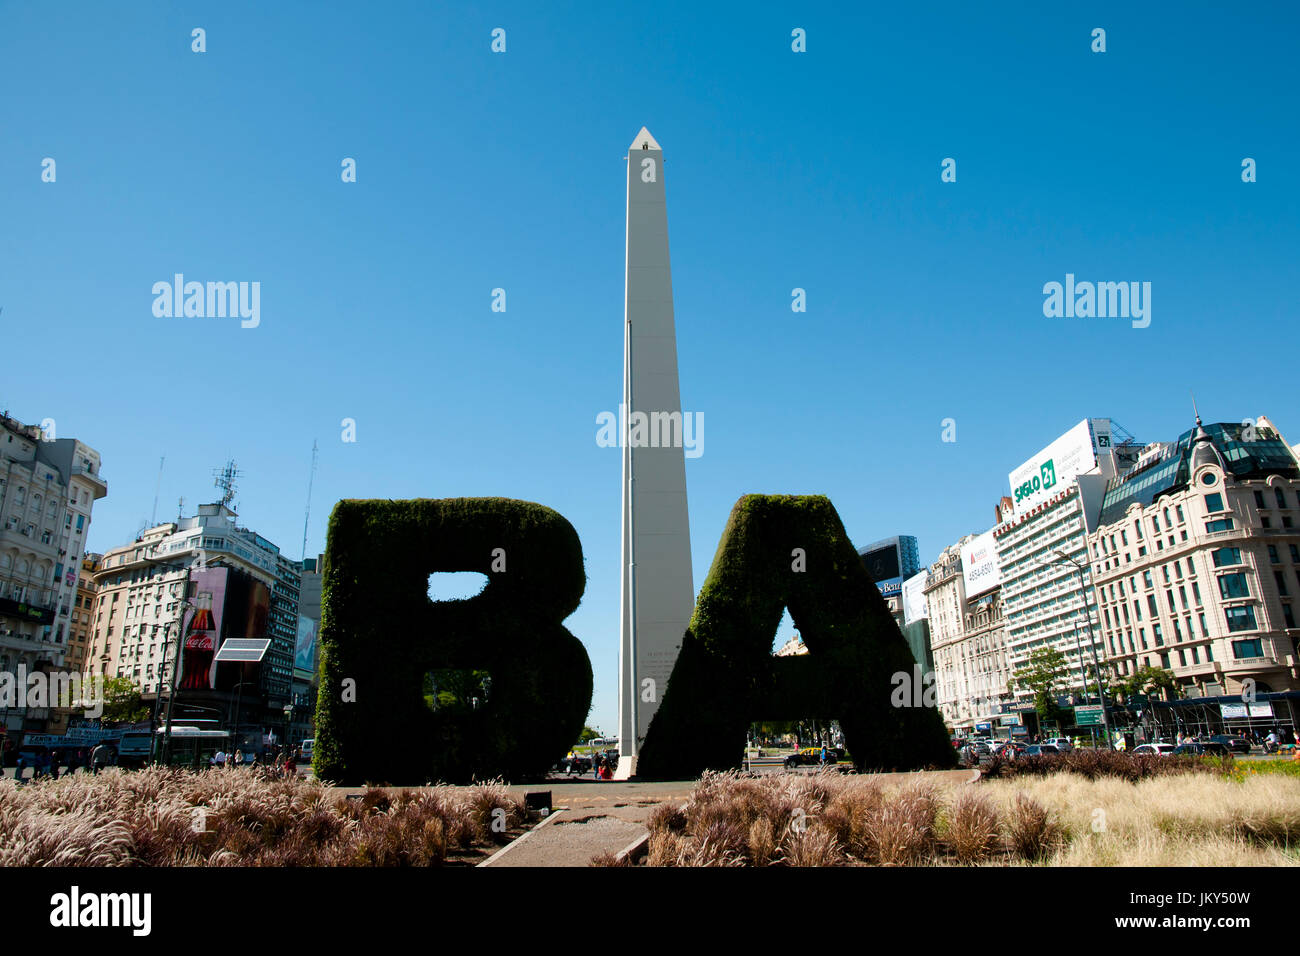 BUENOS AIRES, ARGENTINA - December 15, 2016: Floral BA pattern (Buenos Aires) in Plaza de la Republica near the iconic obelisk Stock Photo